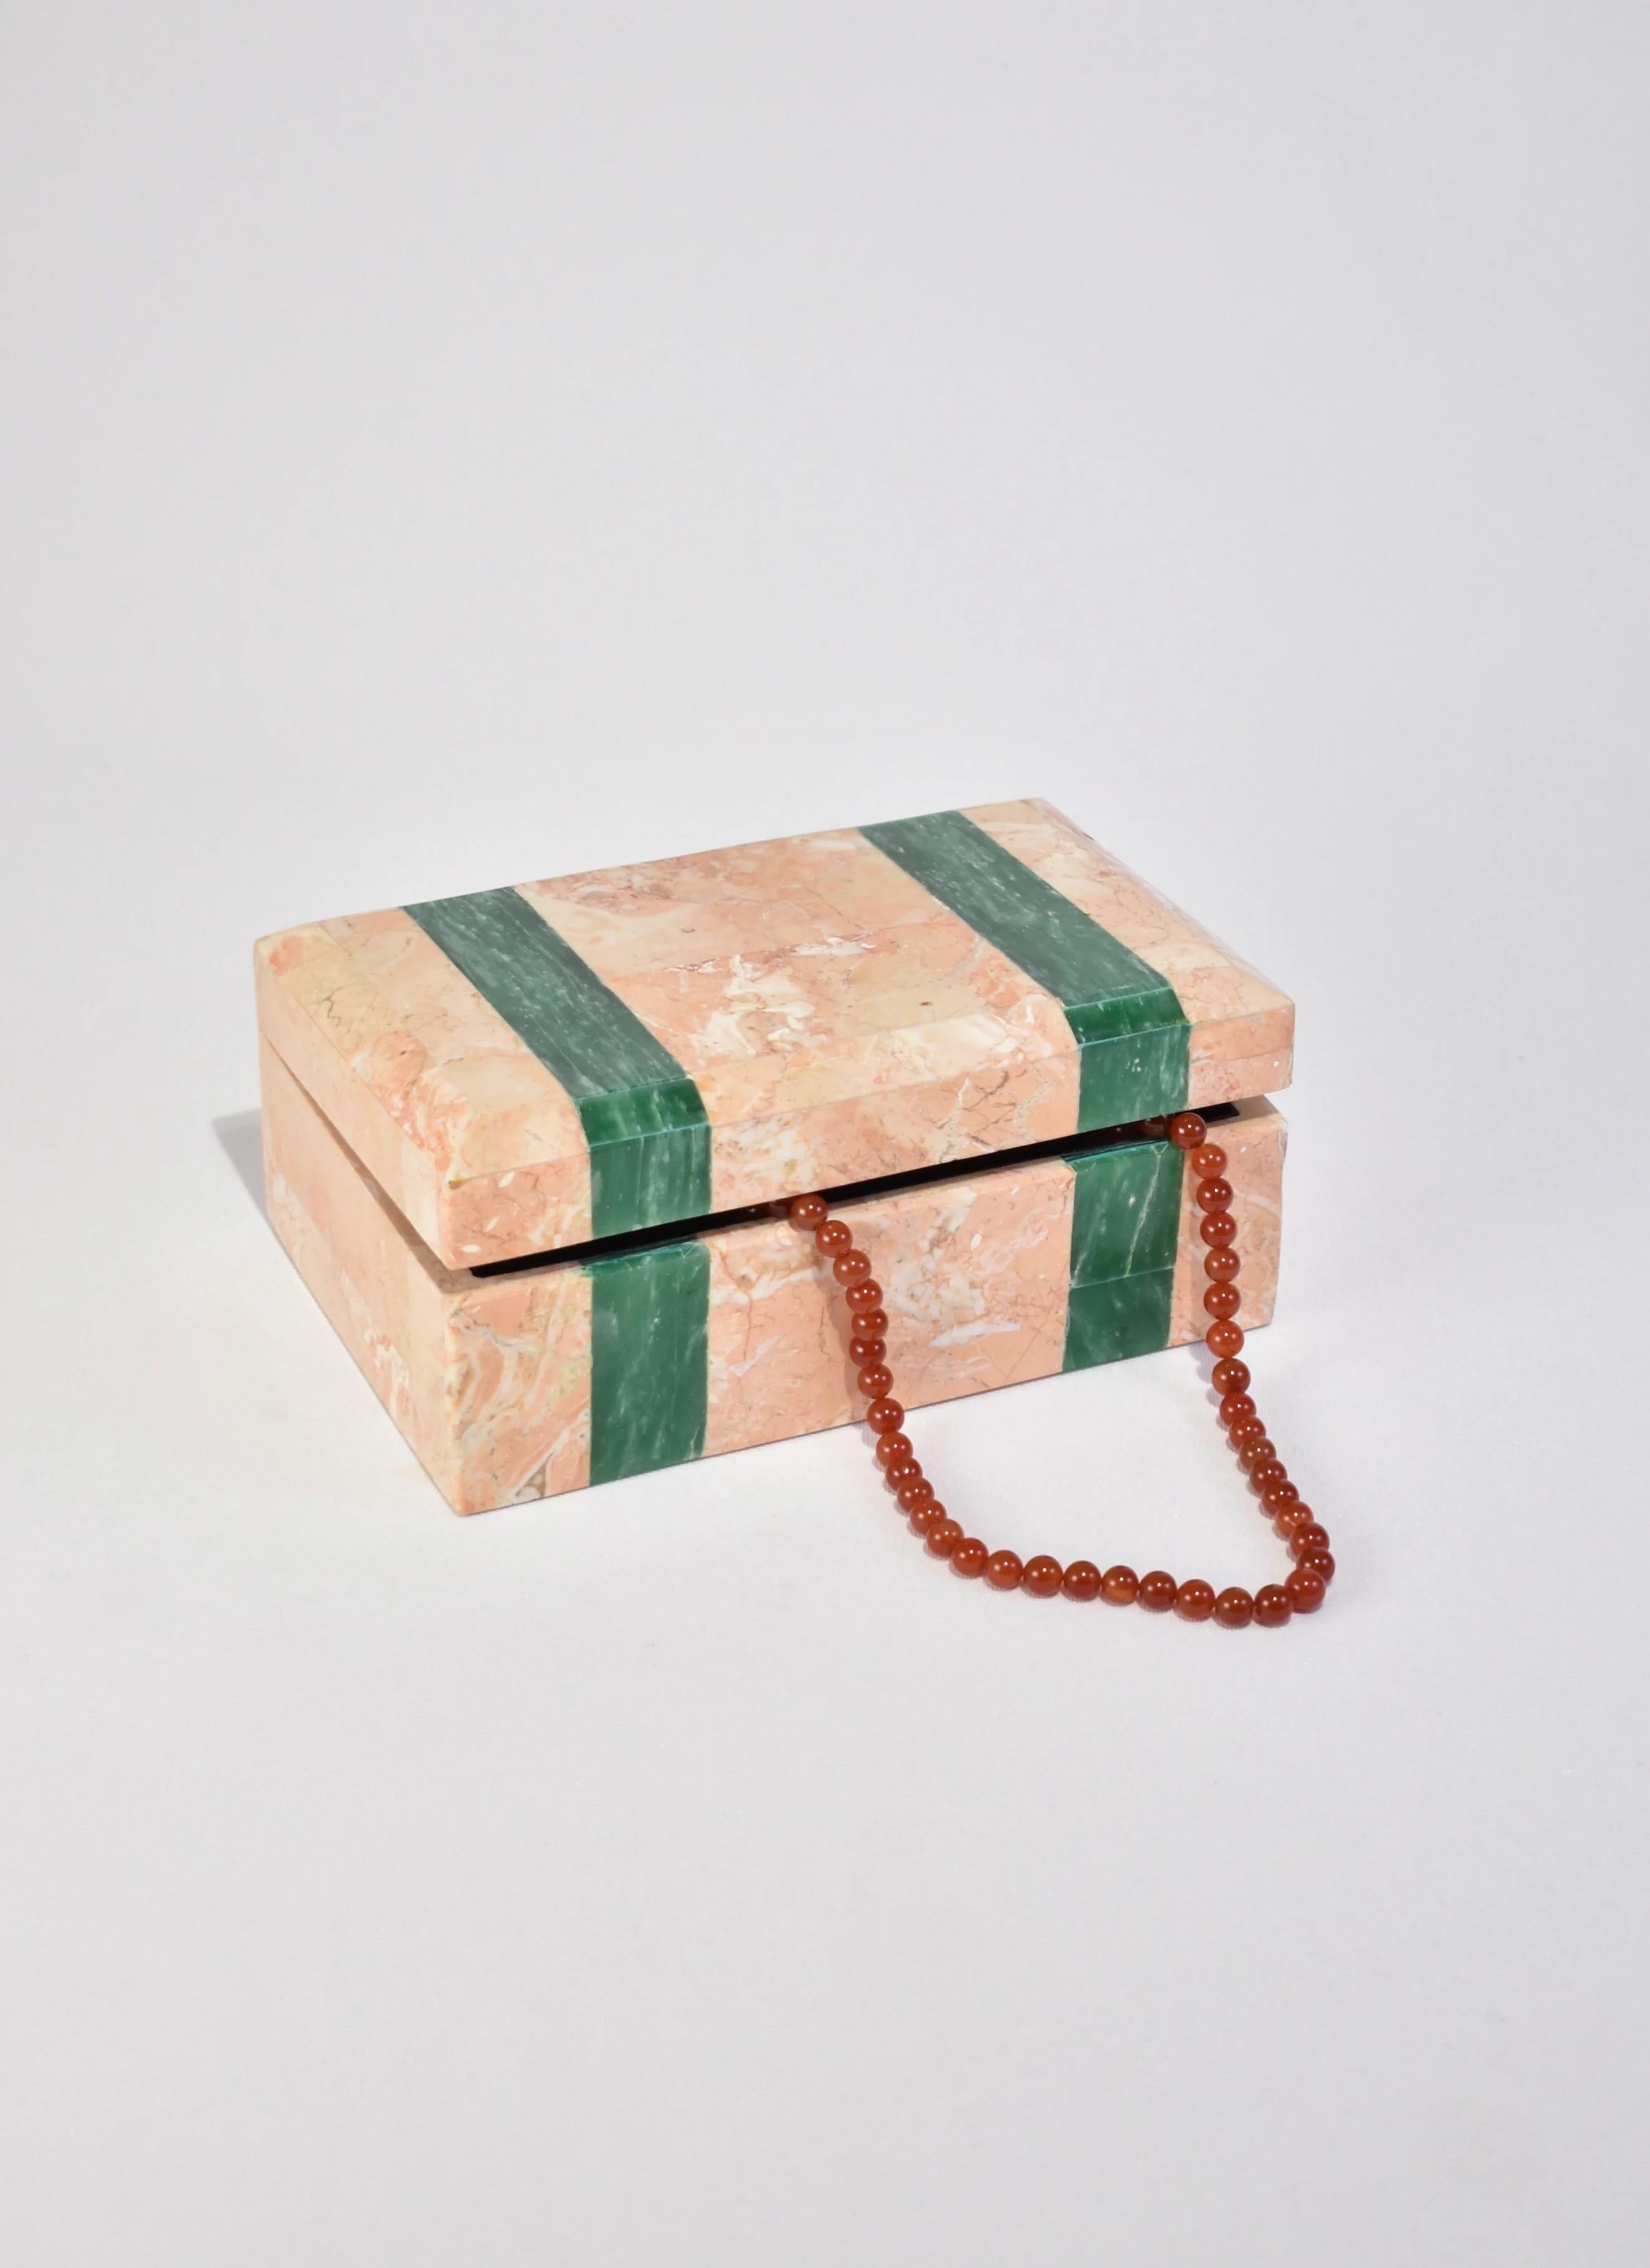 Stunning vintage pink marble jewelry box with green stone inlay and black velvet lining.